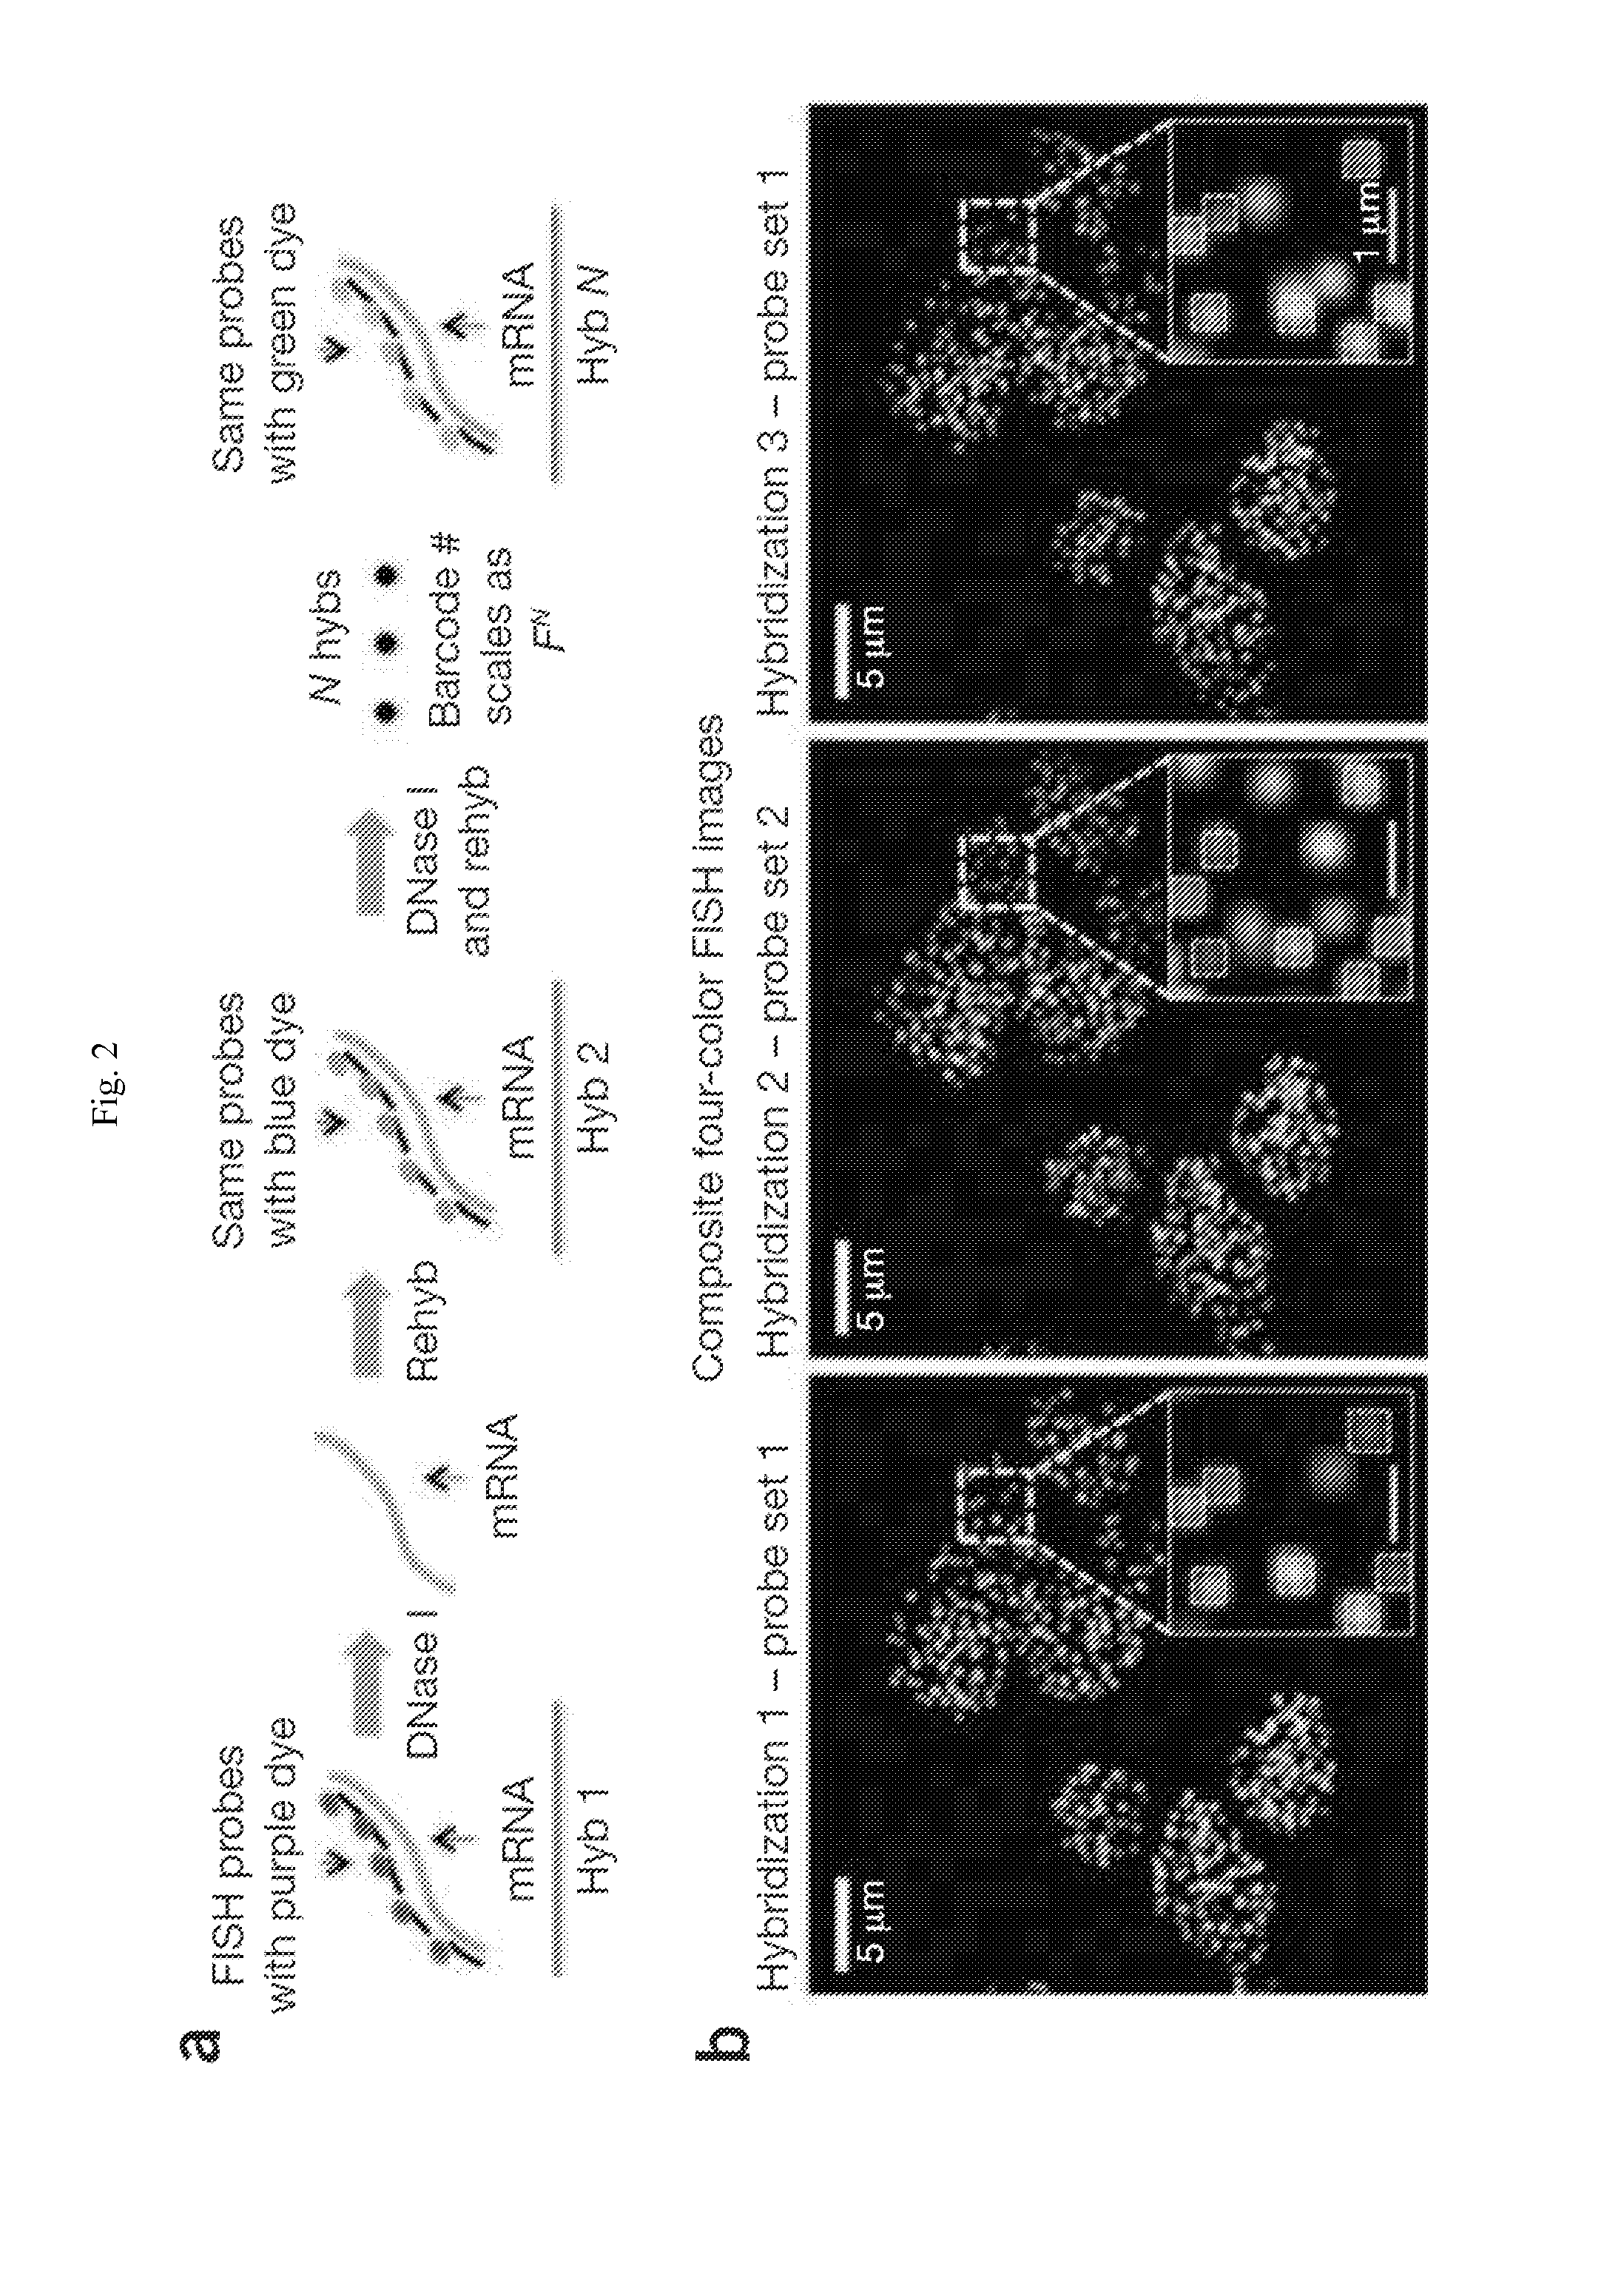 Multiplex labeling of molecules by sequential hybridization barcoding